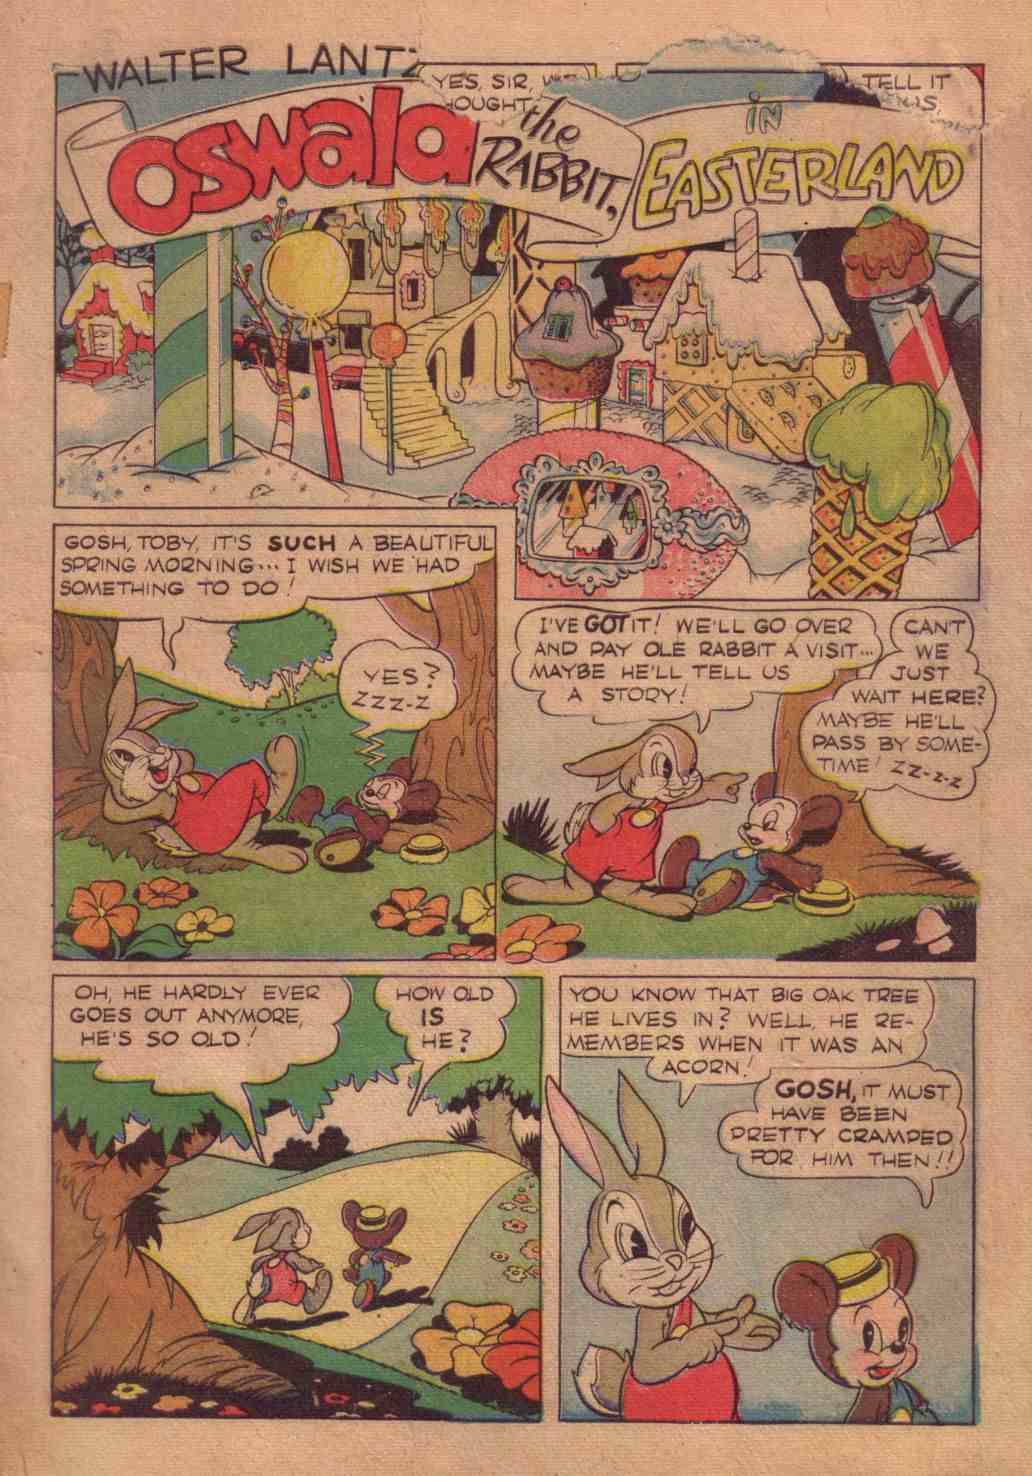 Oswald the Rabbit in Easterland.jpg